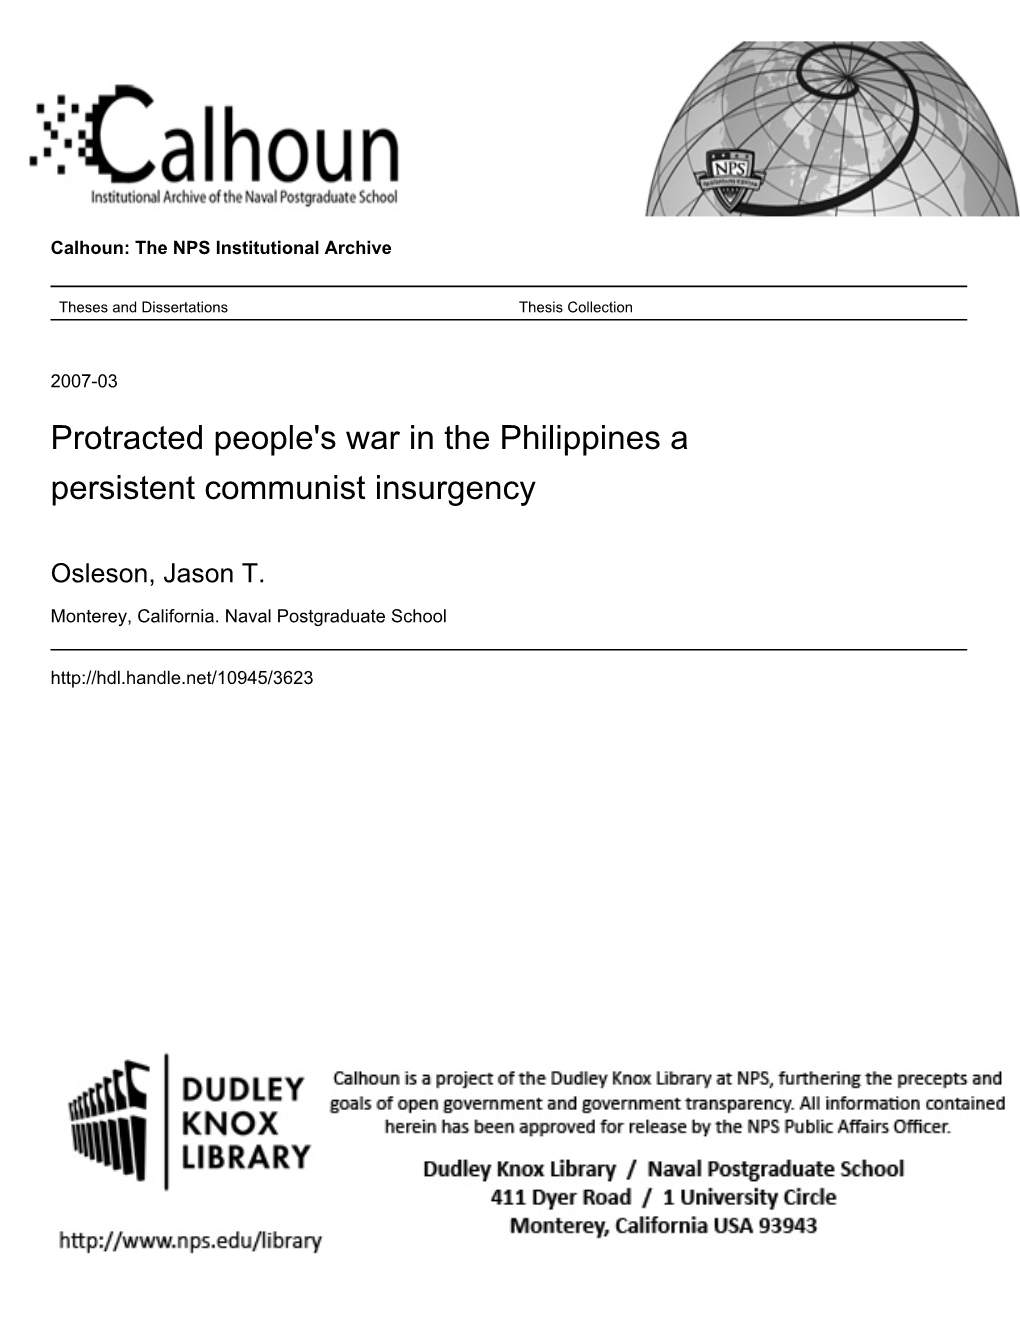 Protracted People's War in the Philippines a Persistent Communist Insurgency